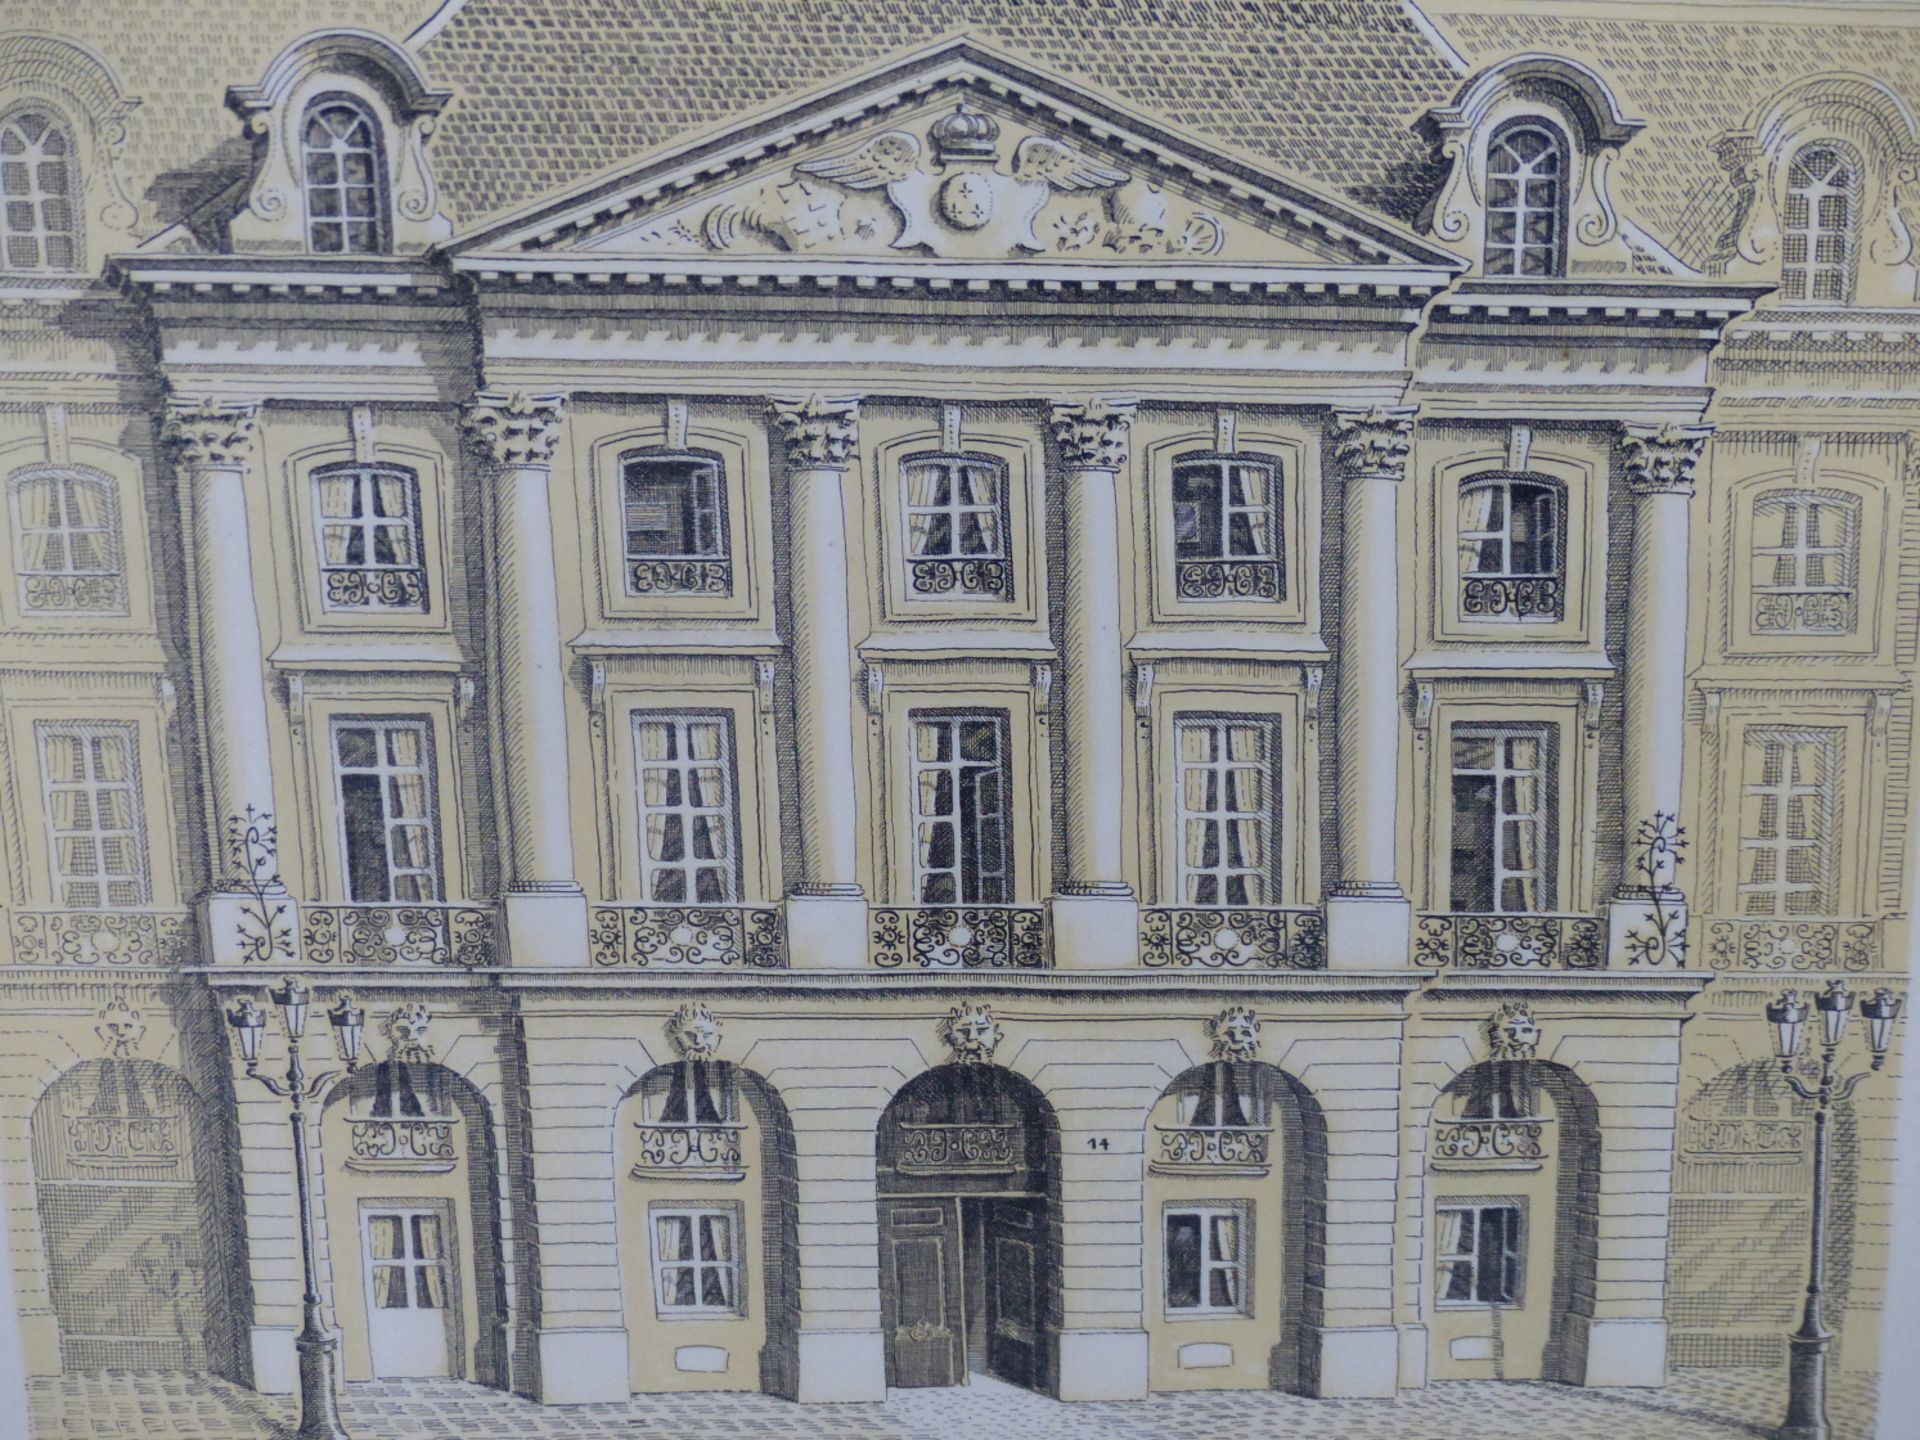 GERALD PAUL CAVALIER (20TH CENTURY). ARR. AN ITALIAN TOWN HALL FACADE, LITHOGRAPH, PENCIL SIGNED AND